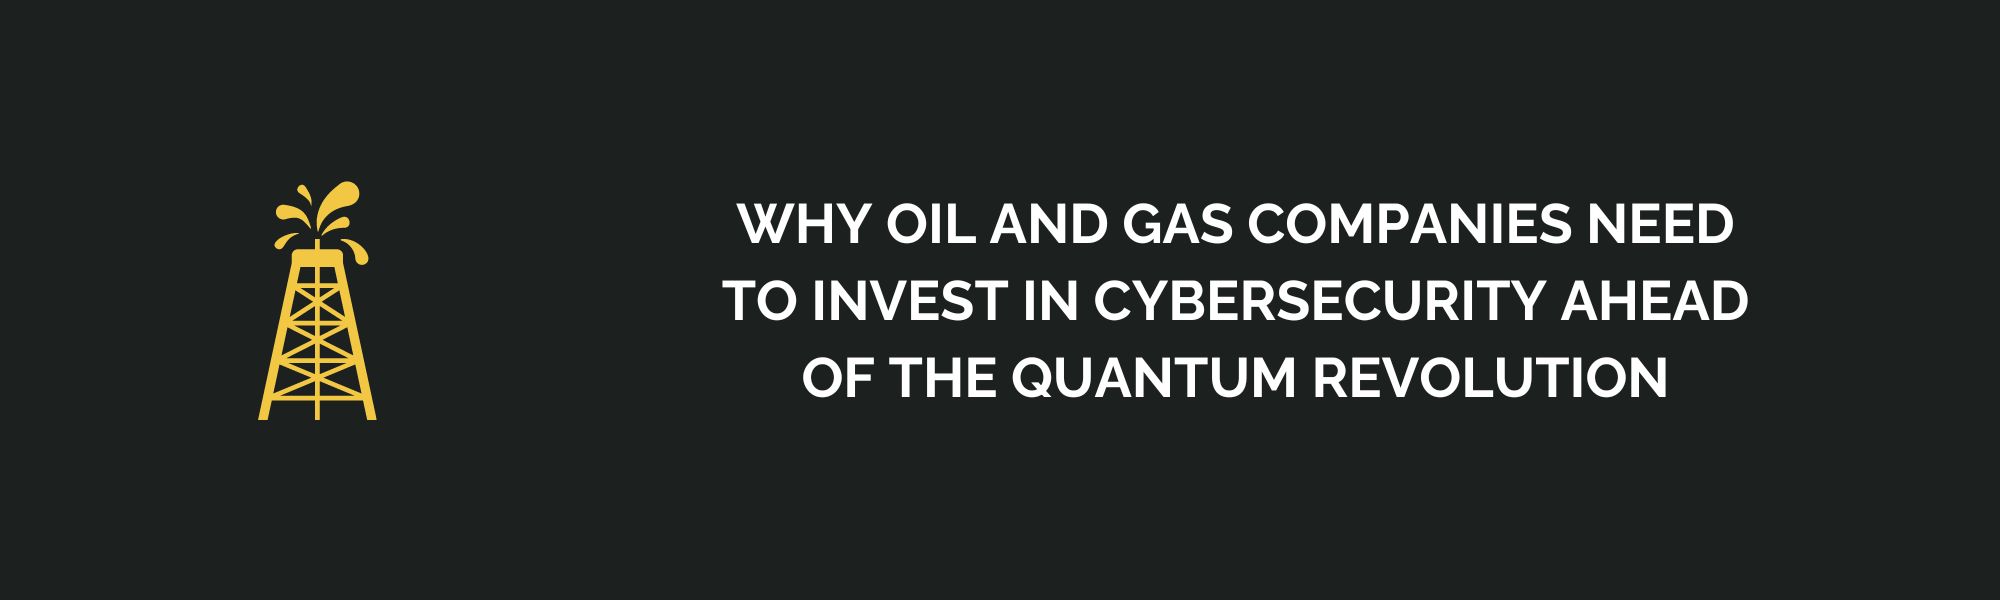 Why Oil and Gas Companies Need to Invest in Cybersecurity Ahead of the Quantum Revolution